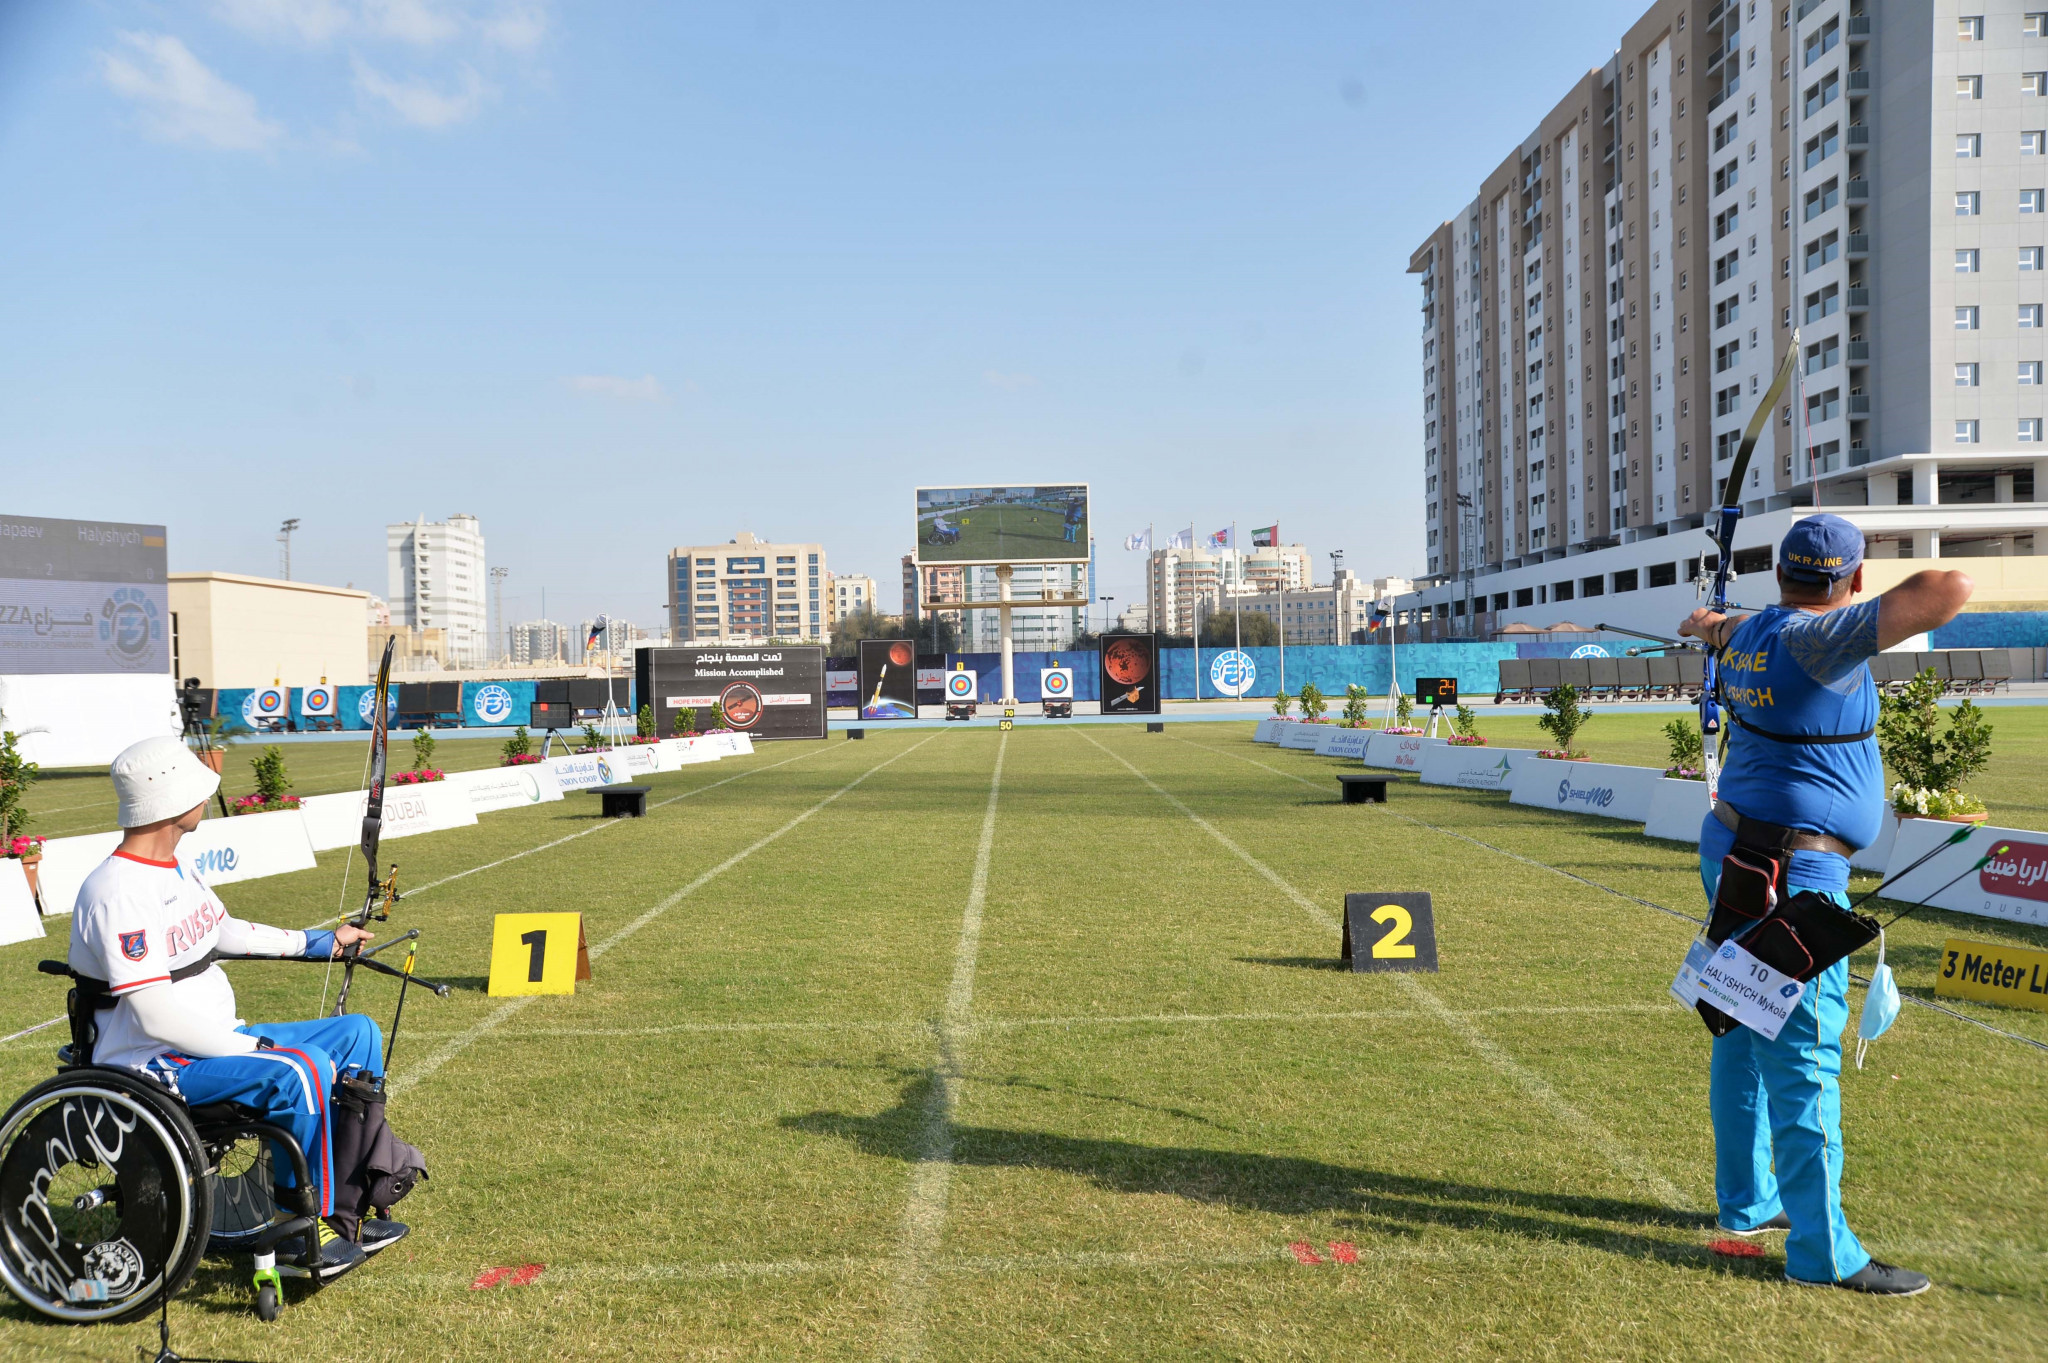 Anton Ziapaev revealed he is hopeful of repeating his gold-medal winning performance at the Fazza Para Archery World Ranking Tournament at Tokyo 2020 ©Gaber Abedeen/Fazza LOC Media